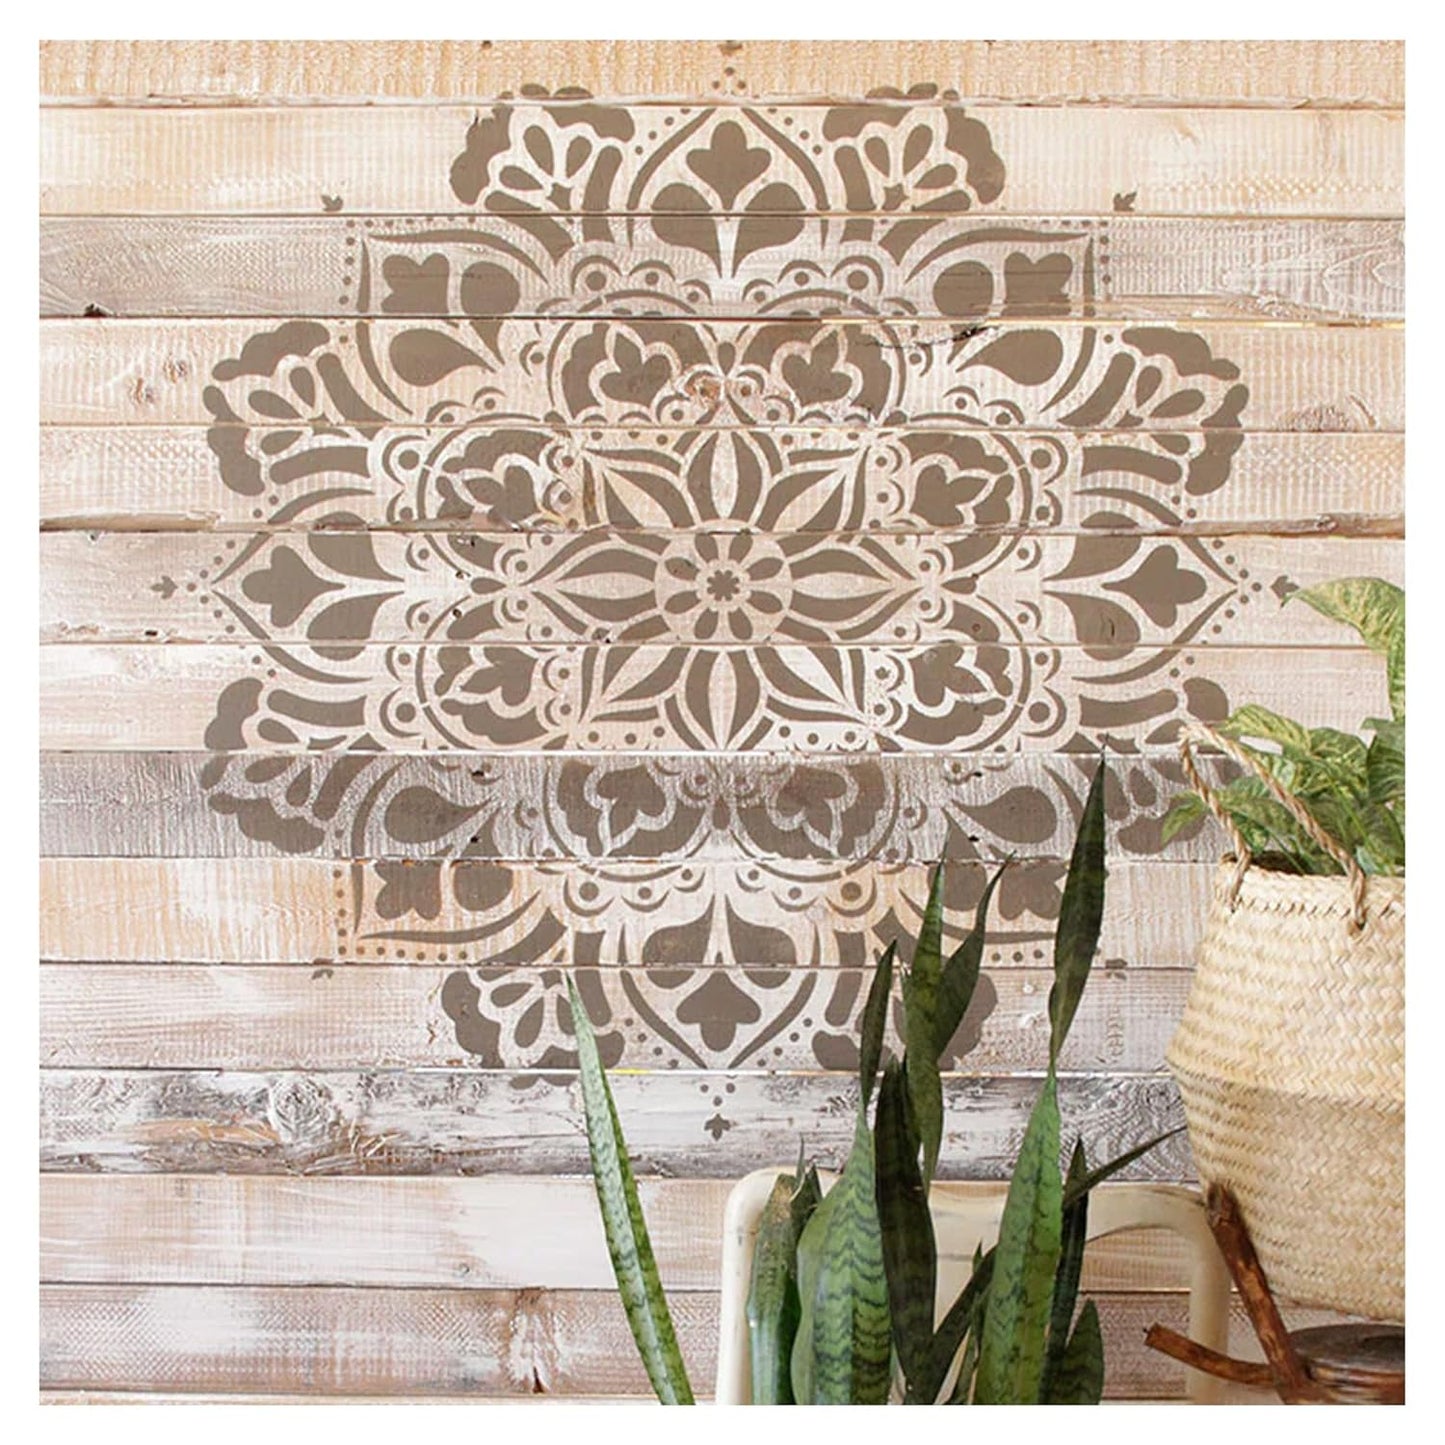 Latest Healing Mandala Stencils for Wall Painting - Pack of 1